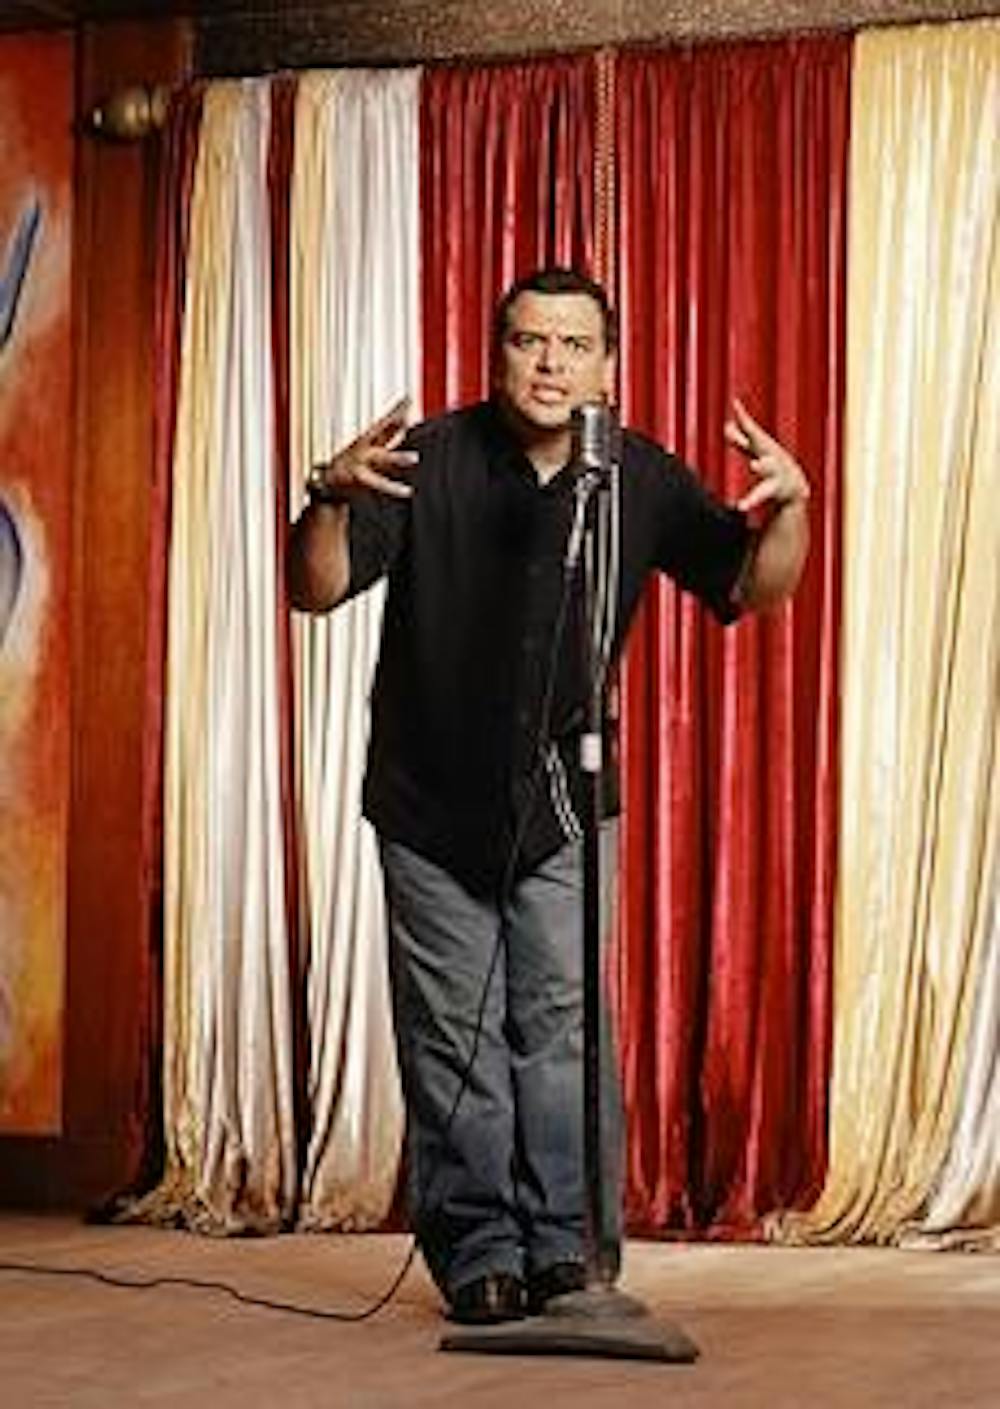 Comedian Carlos Mencia's new DVD demonstrates his gall.